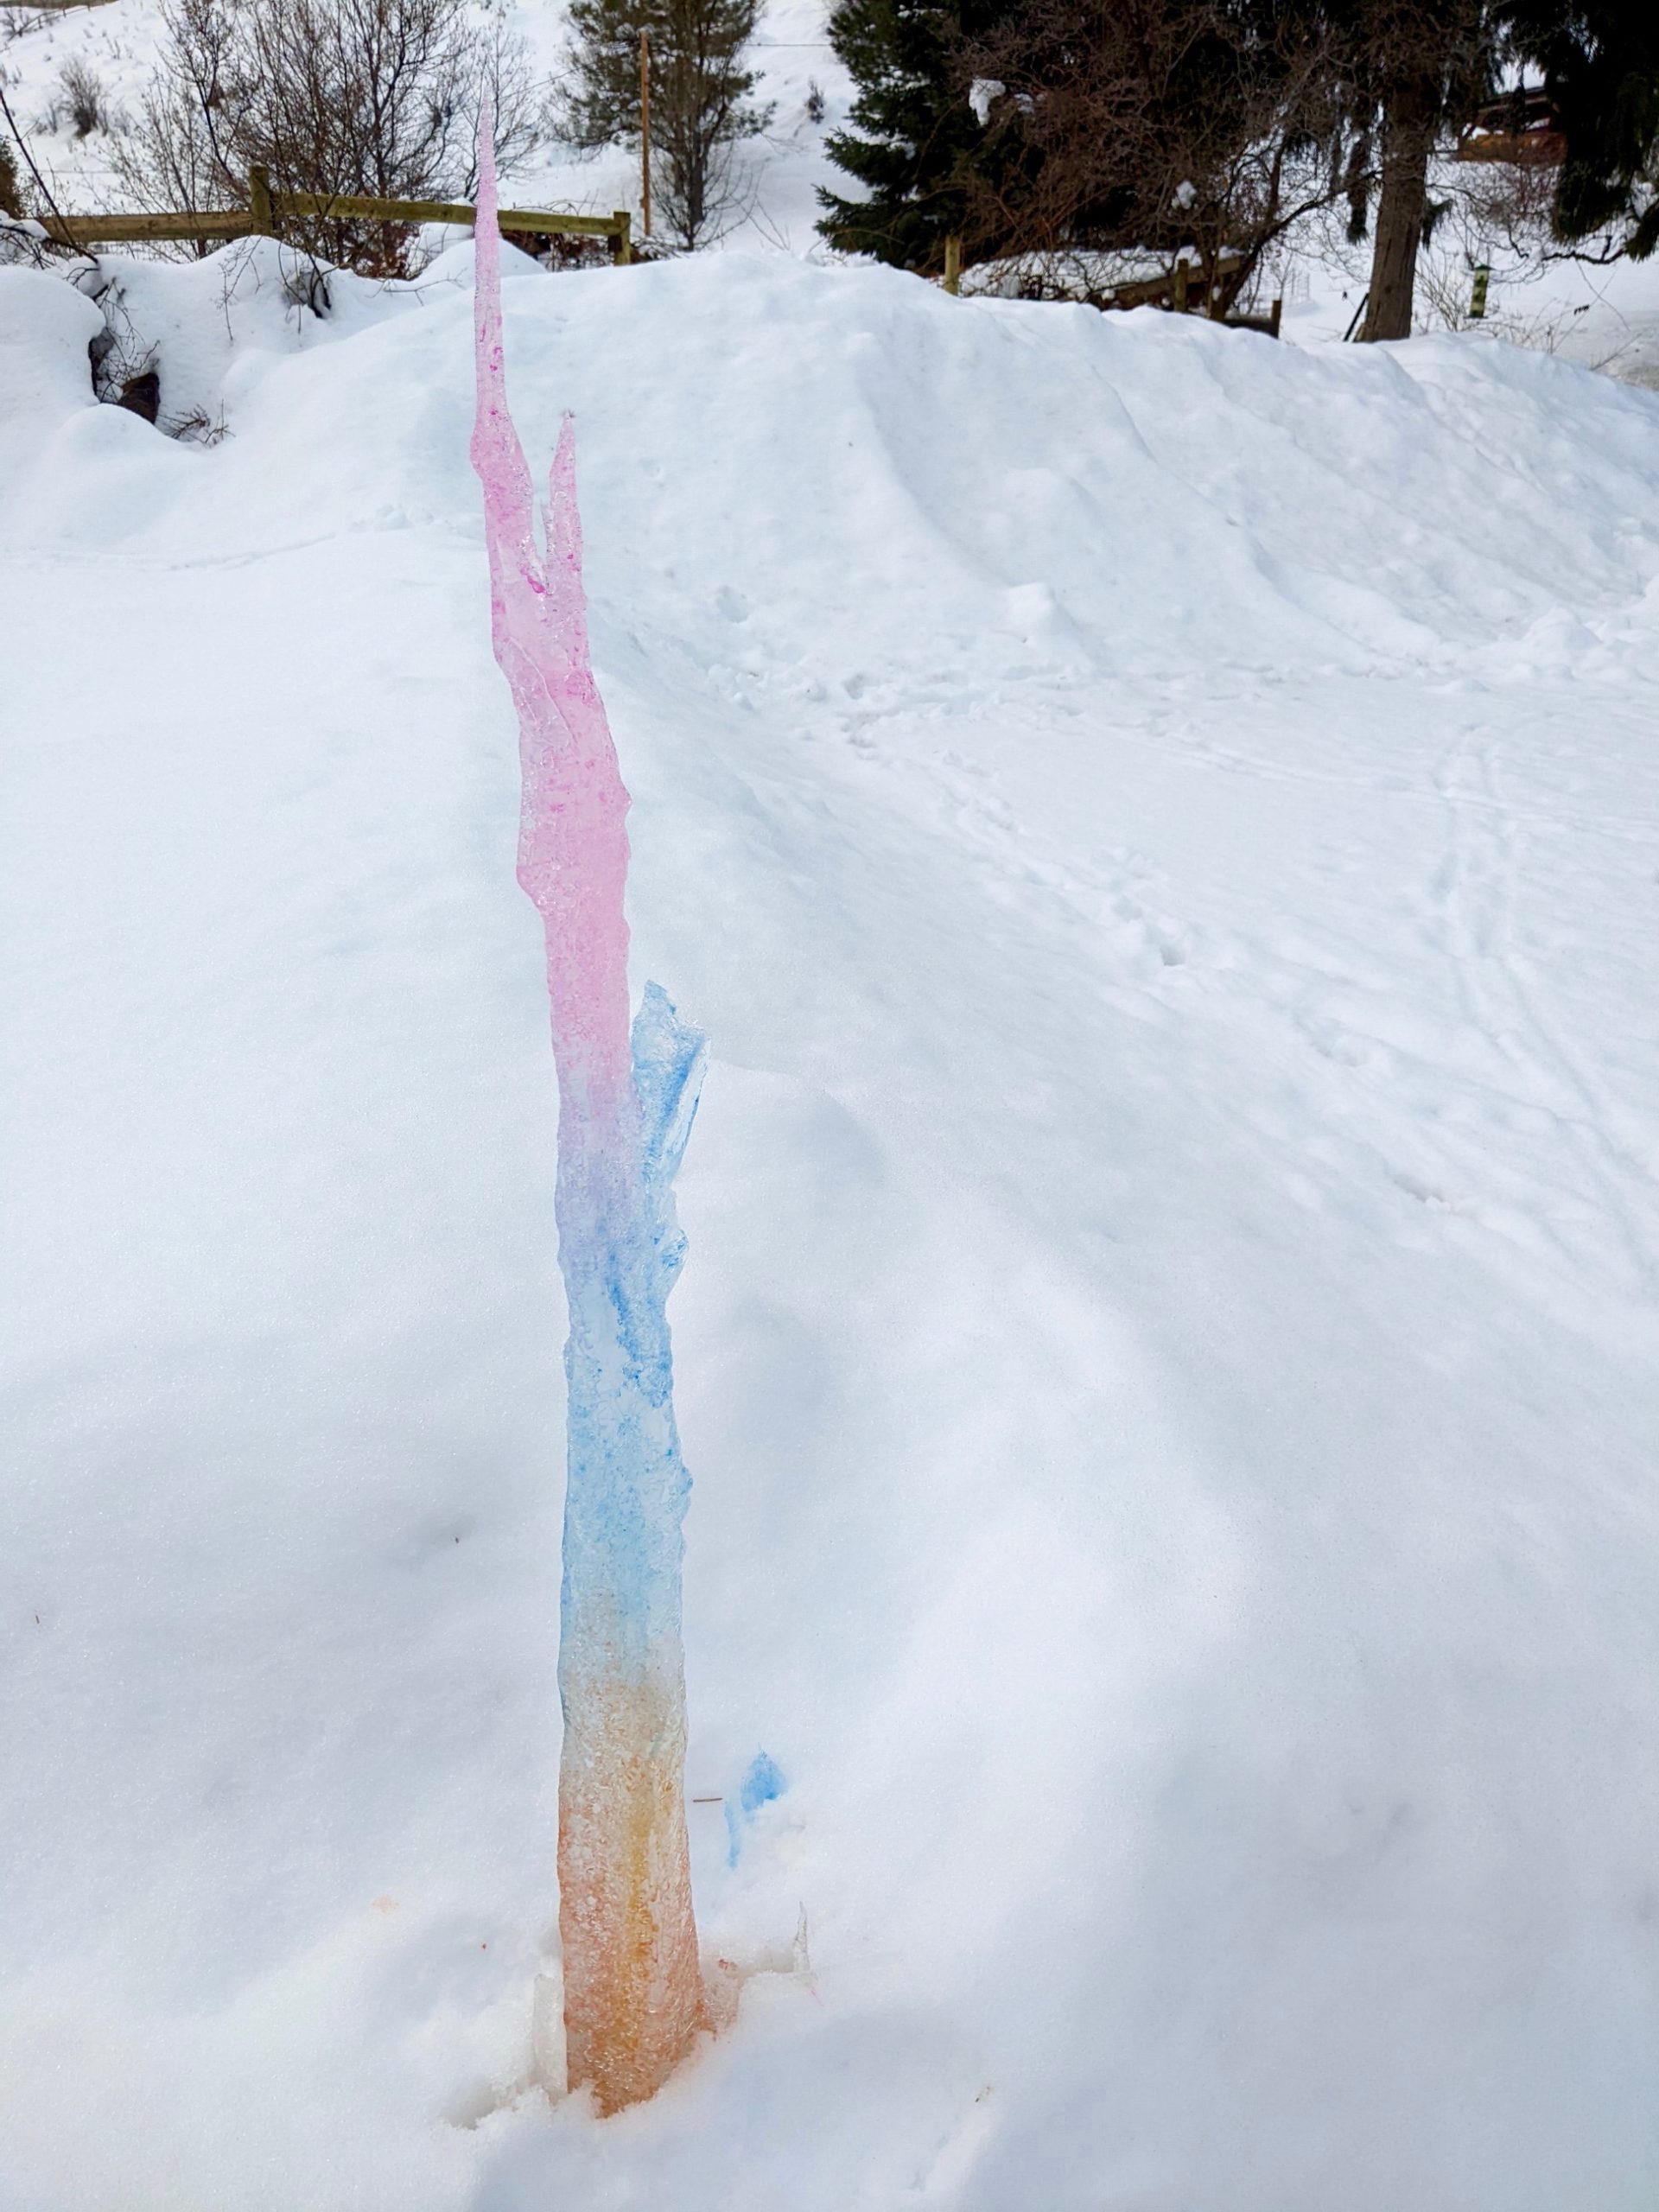 Painted icicle in the snow